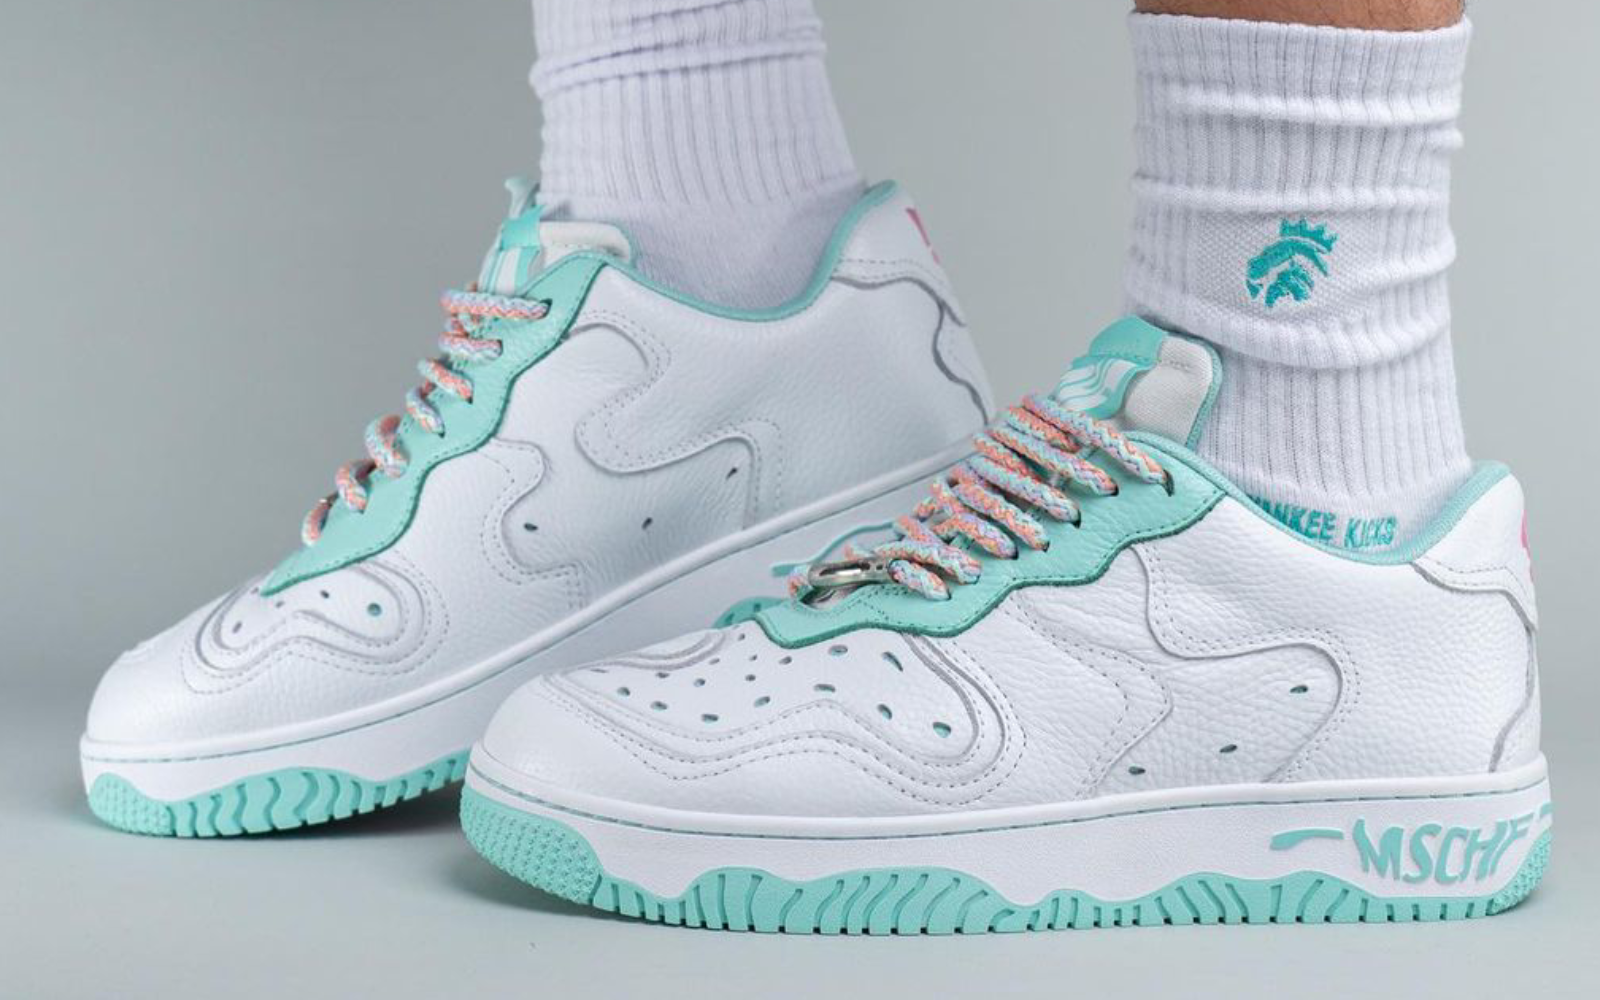 Everything You Need To Know About About The Nike X Tiffany & Co.  Collaboration